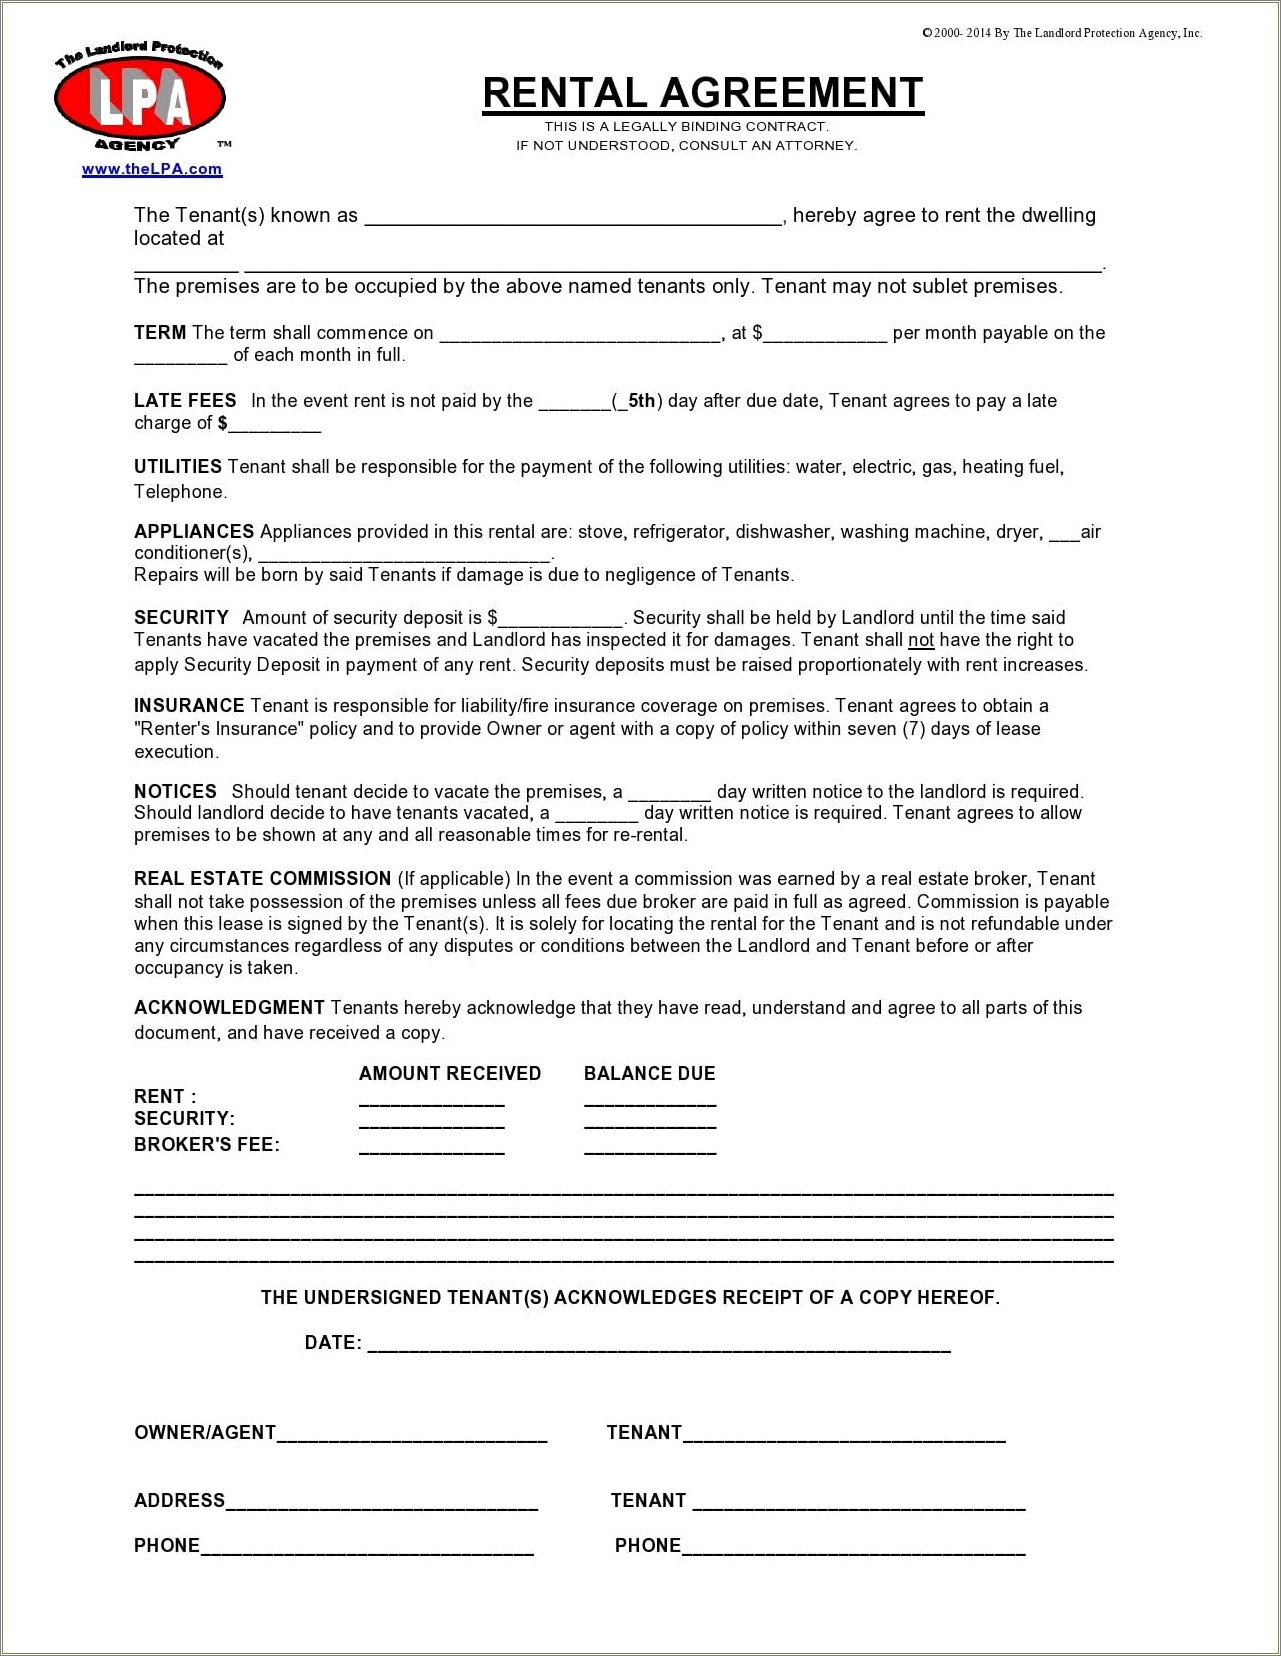 Free Office Lease Agreement Template Word